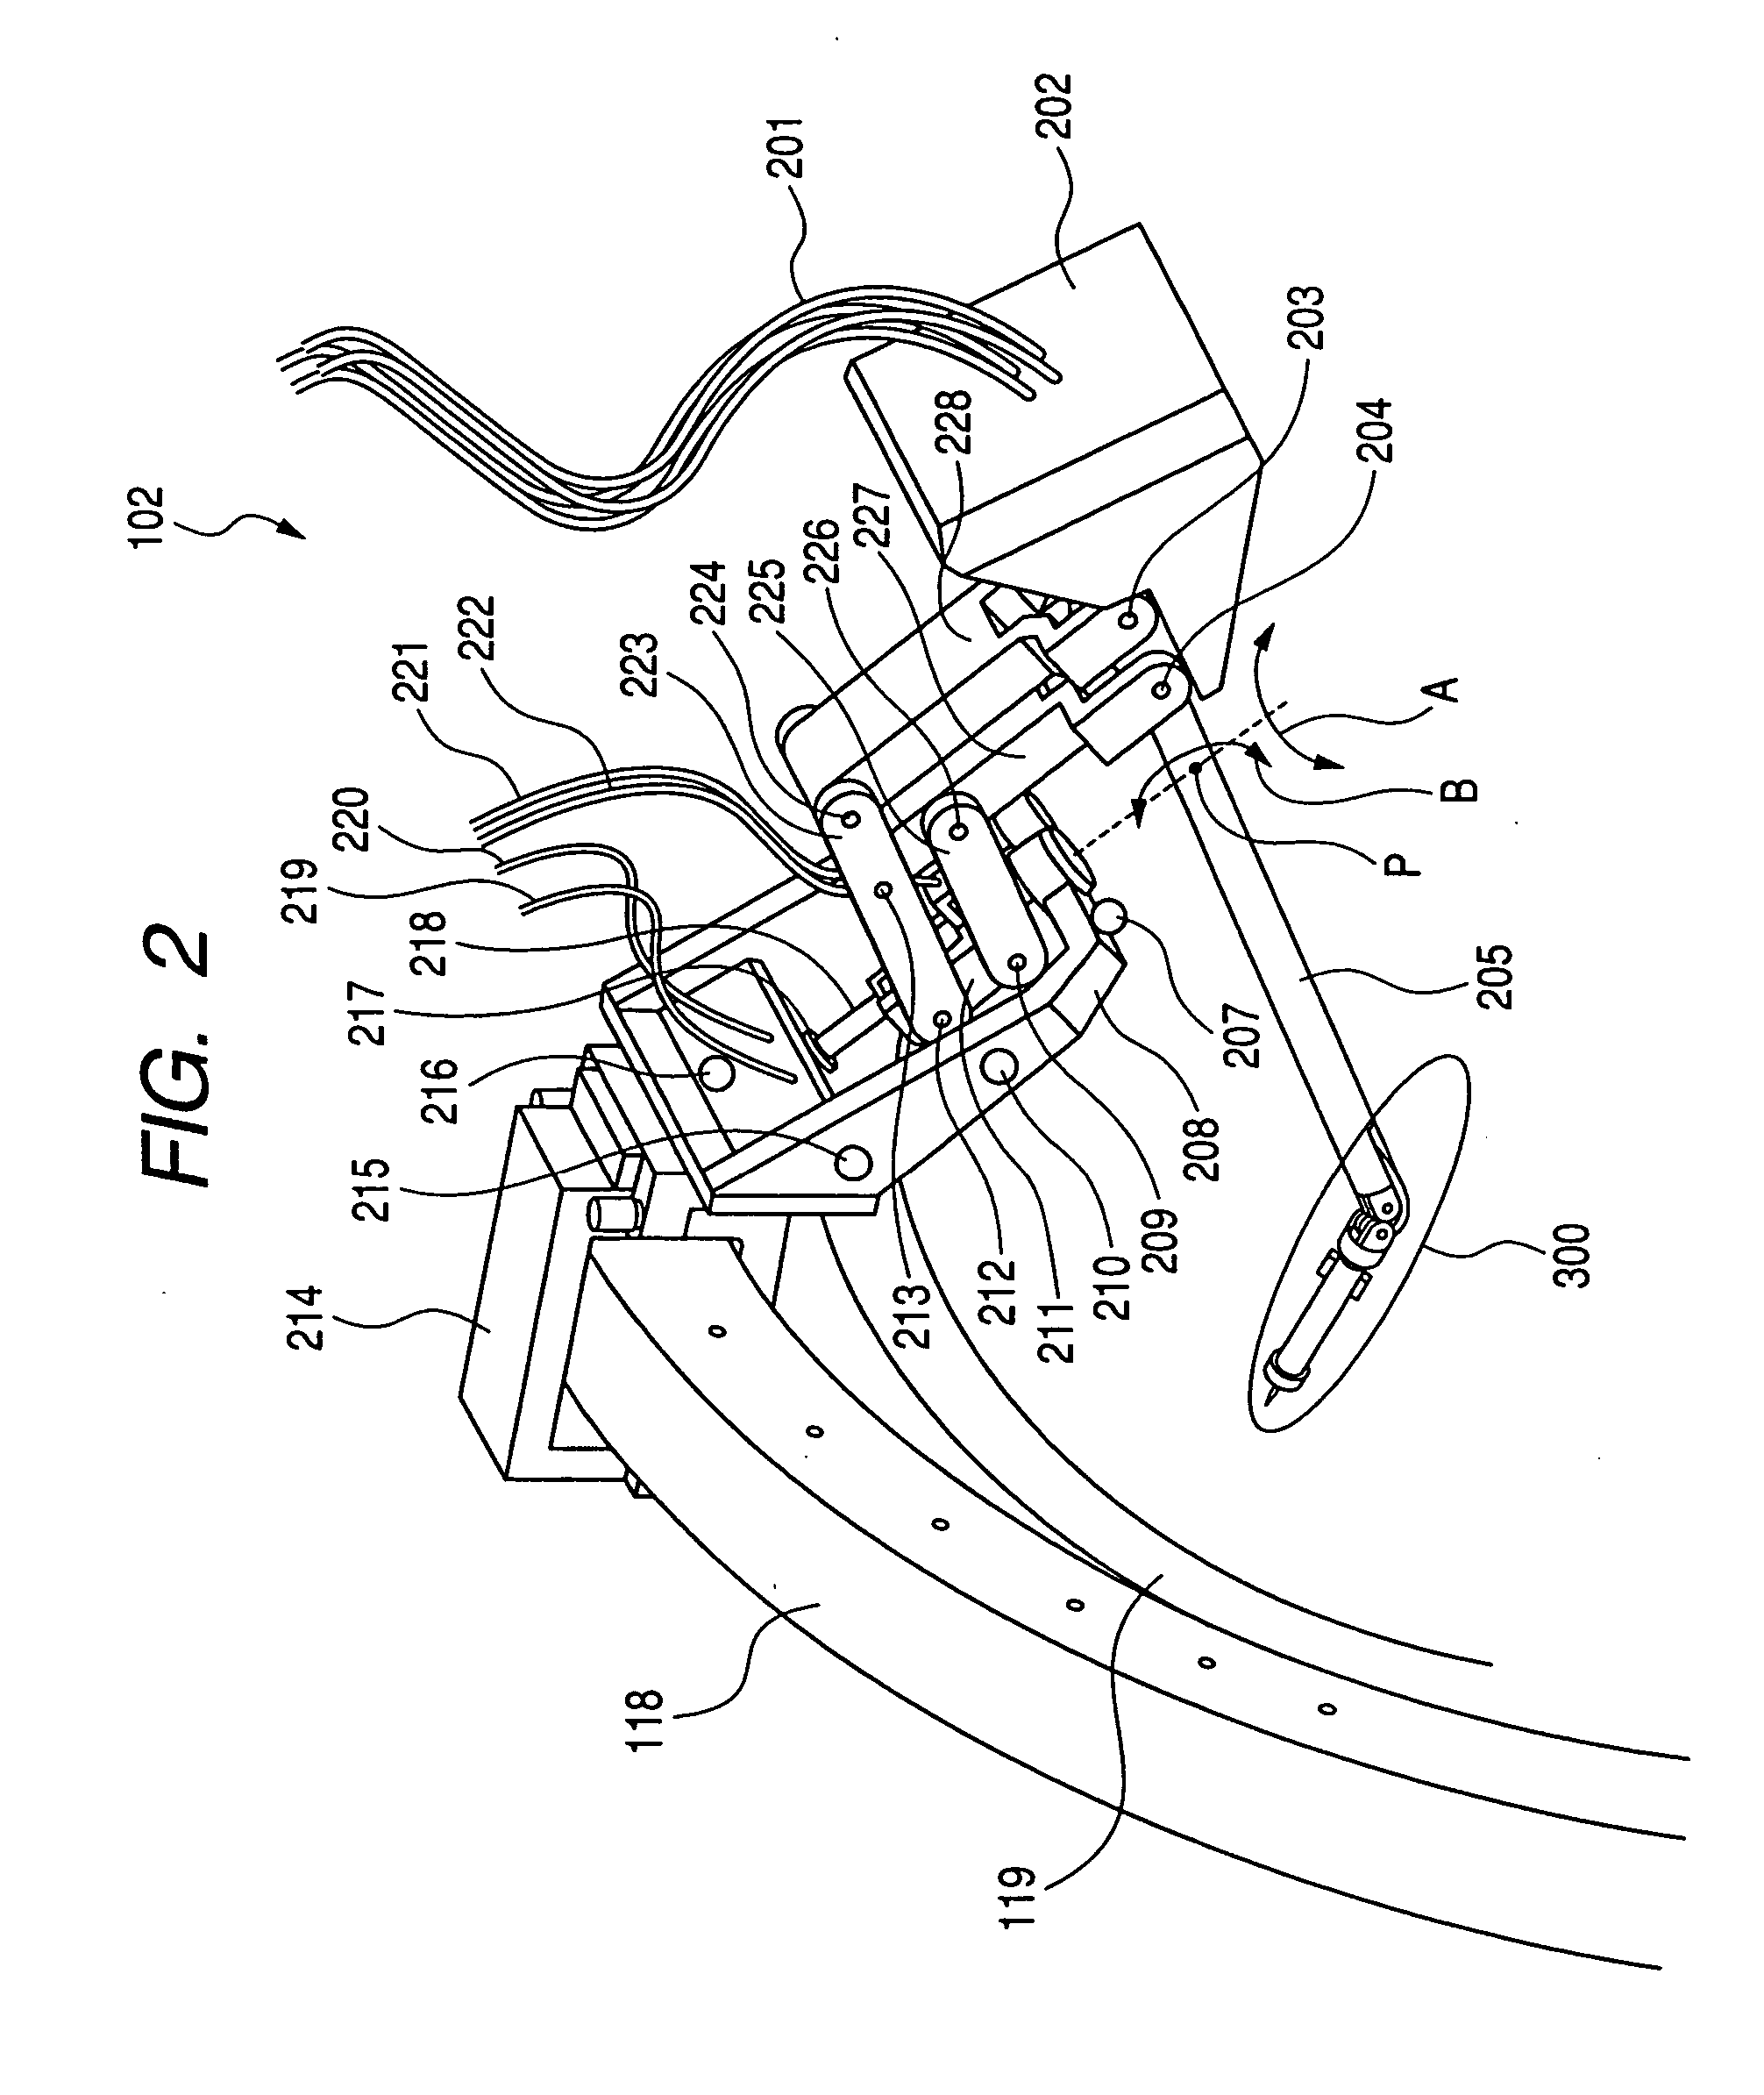 Surgical operation apparatus and manipulator for use therein